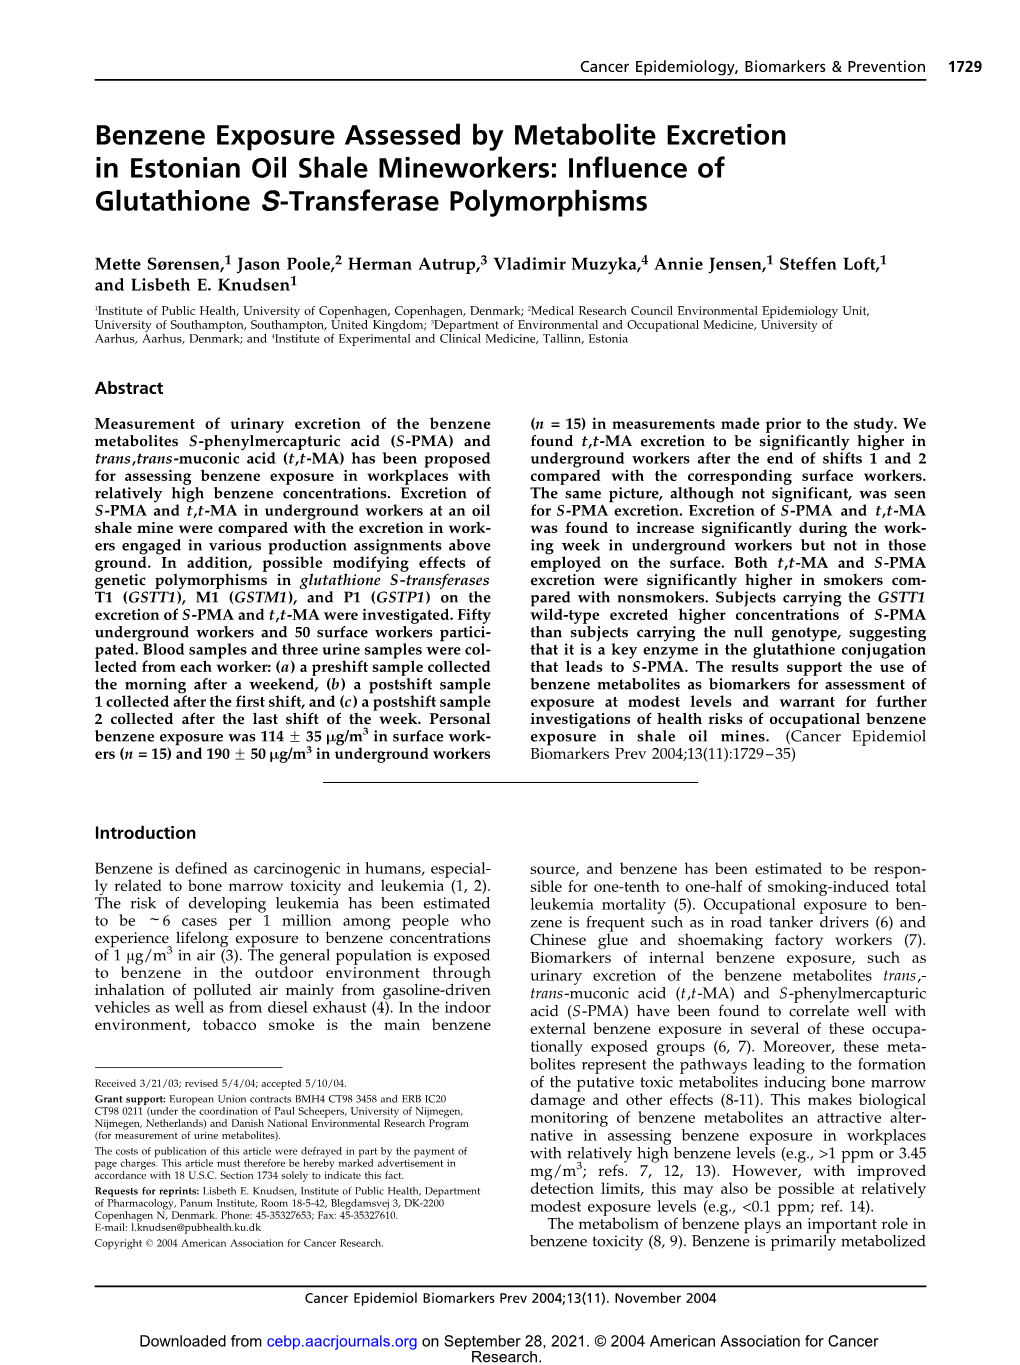 Benzene Exposure Assessed by Metabolite Excretion in Estonian Oil Shale Mineworkers: Influence of Glutathione S-Transferase Polymorphisms